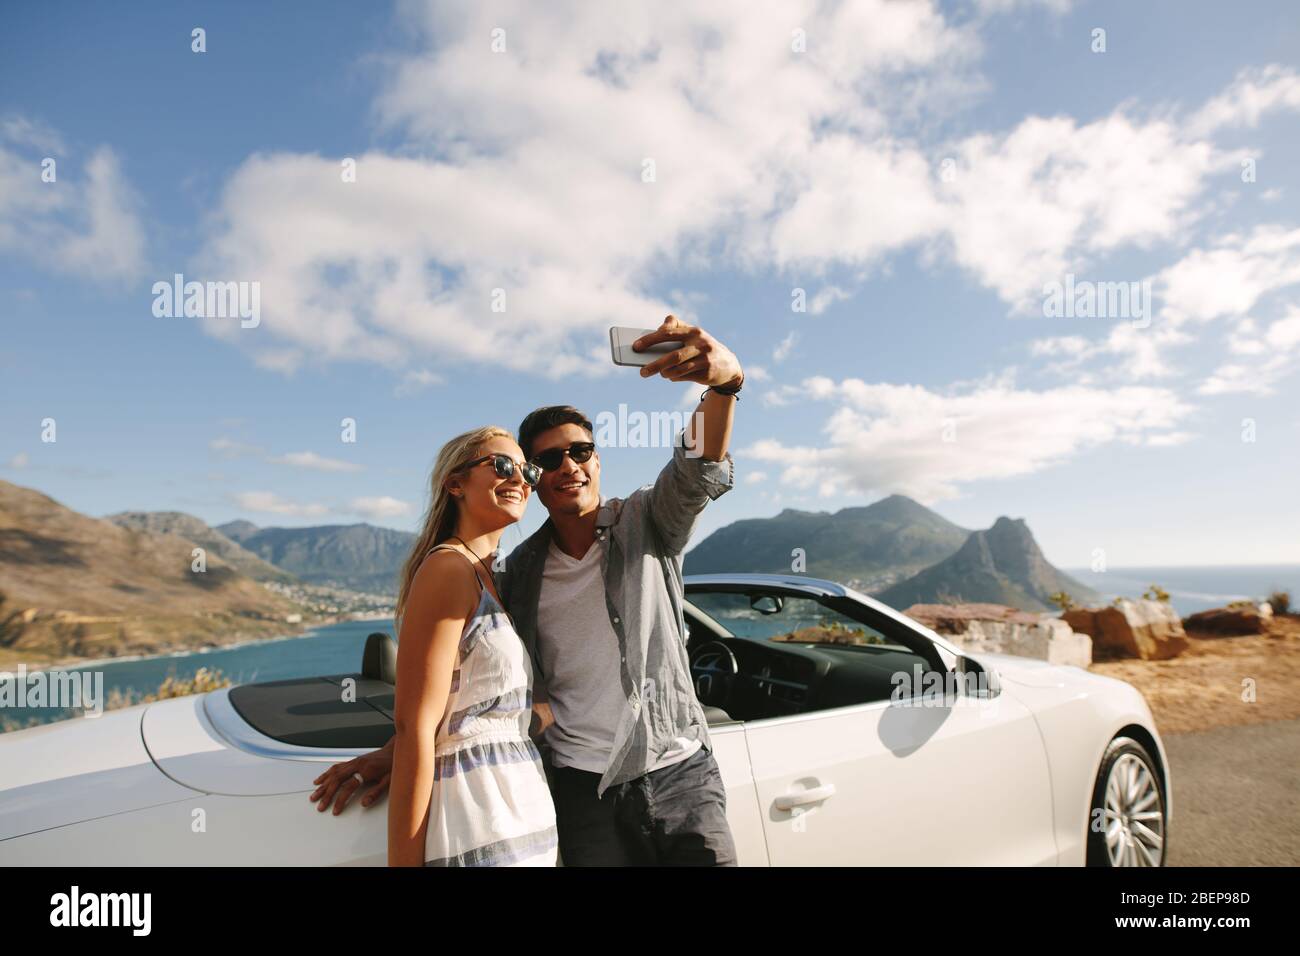 Man taking selfie with his girlfriend on a road trip. Couple standing by their car taking selfie with a mobile phone outdoors. Stock Photo